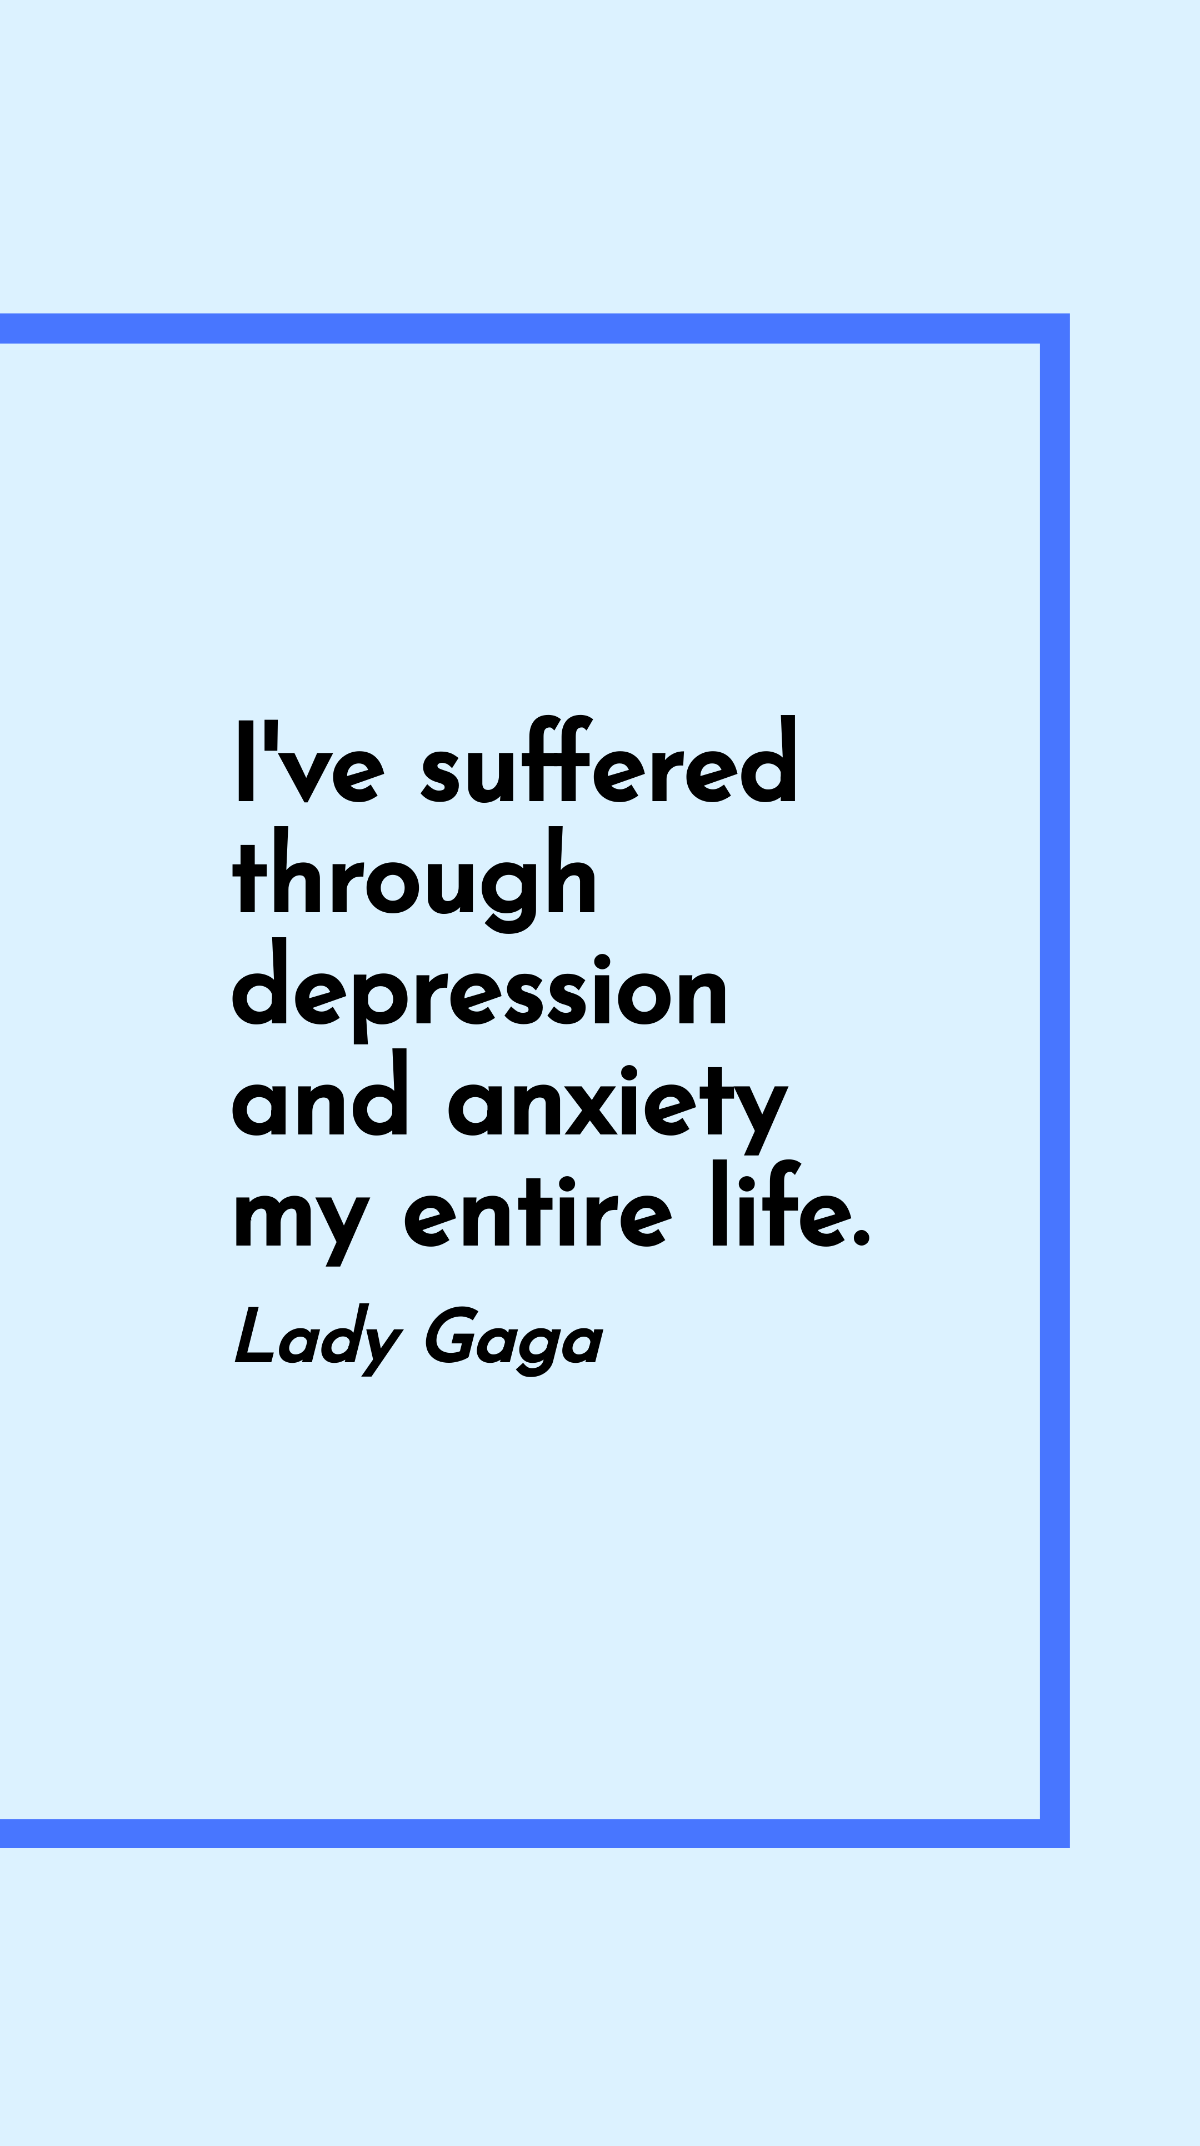 Free Lady Gaga - I've suffered through depression and anxiety my entire life. Template